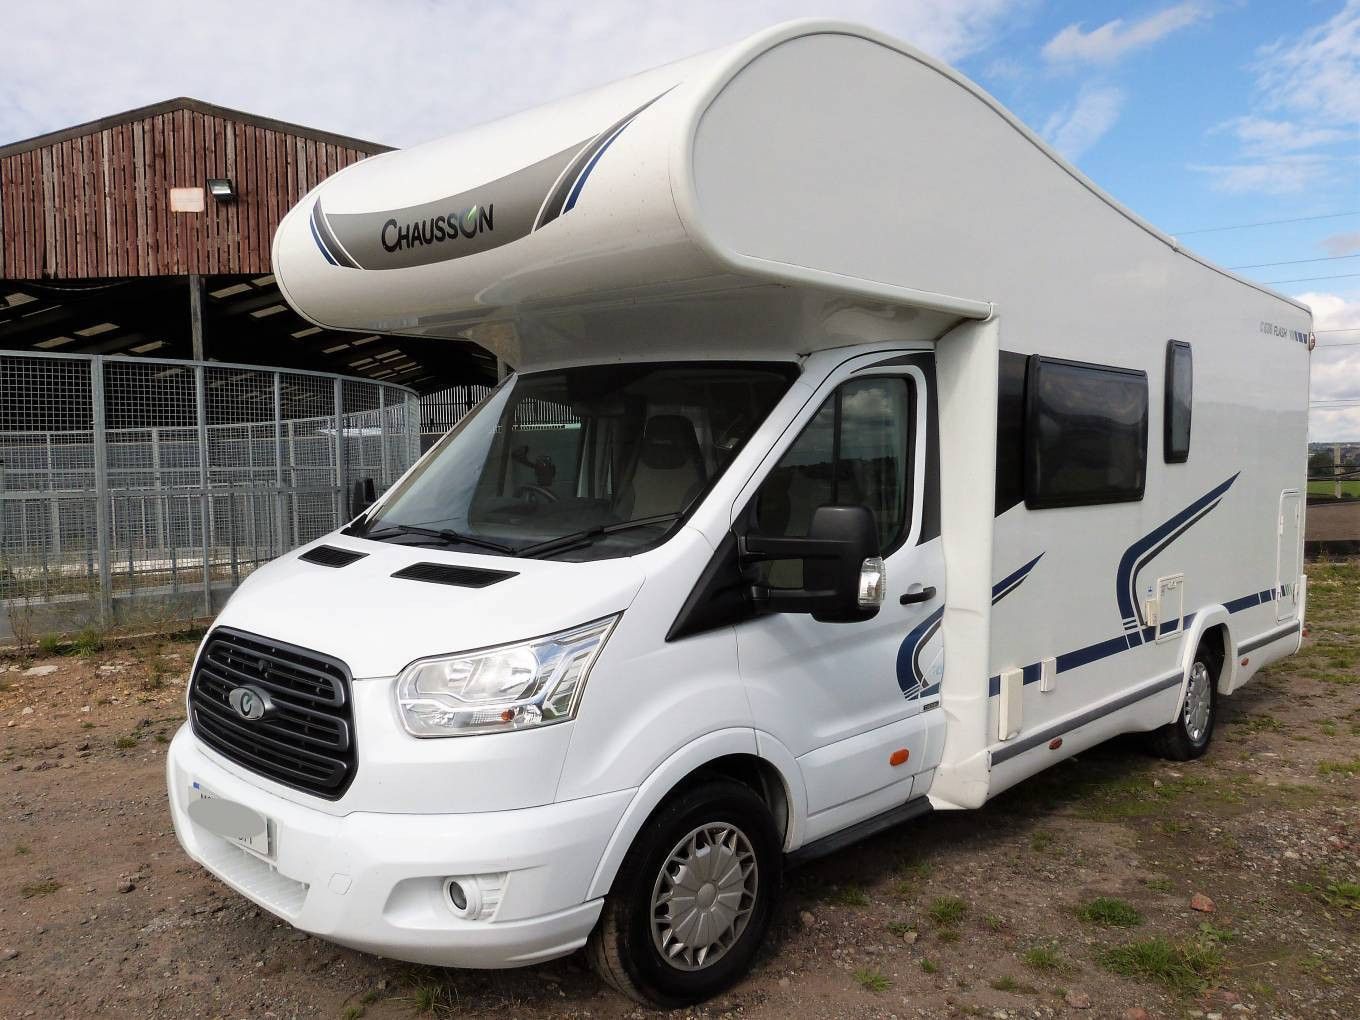 A Chausson Motorhome called Chausson-C636 and for hire in High Wycombe, England